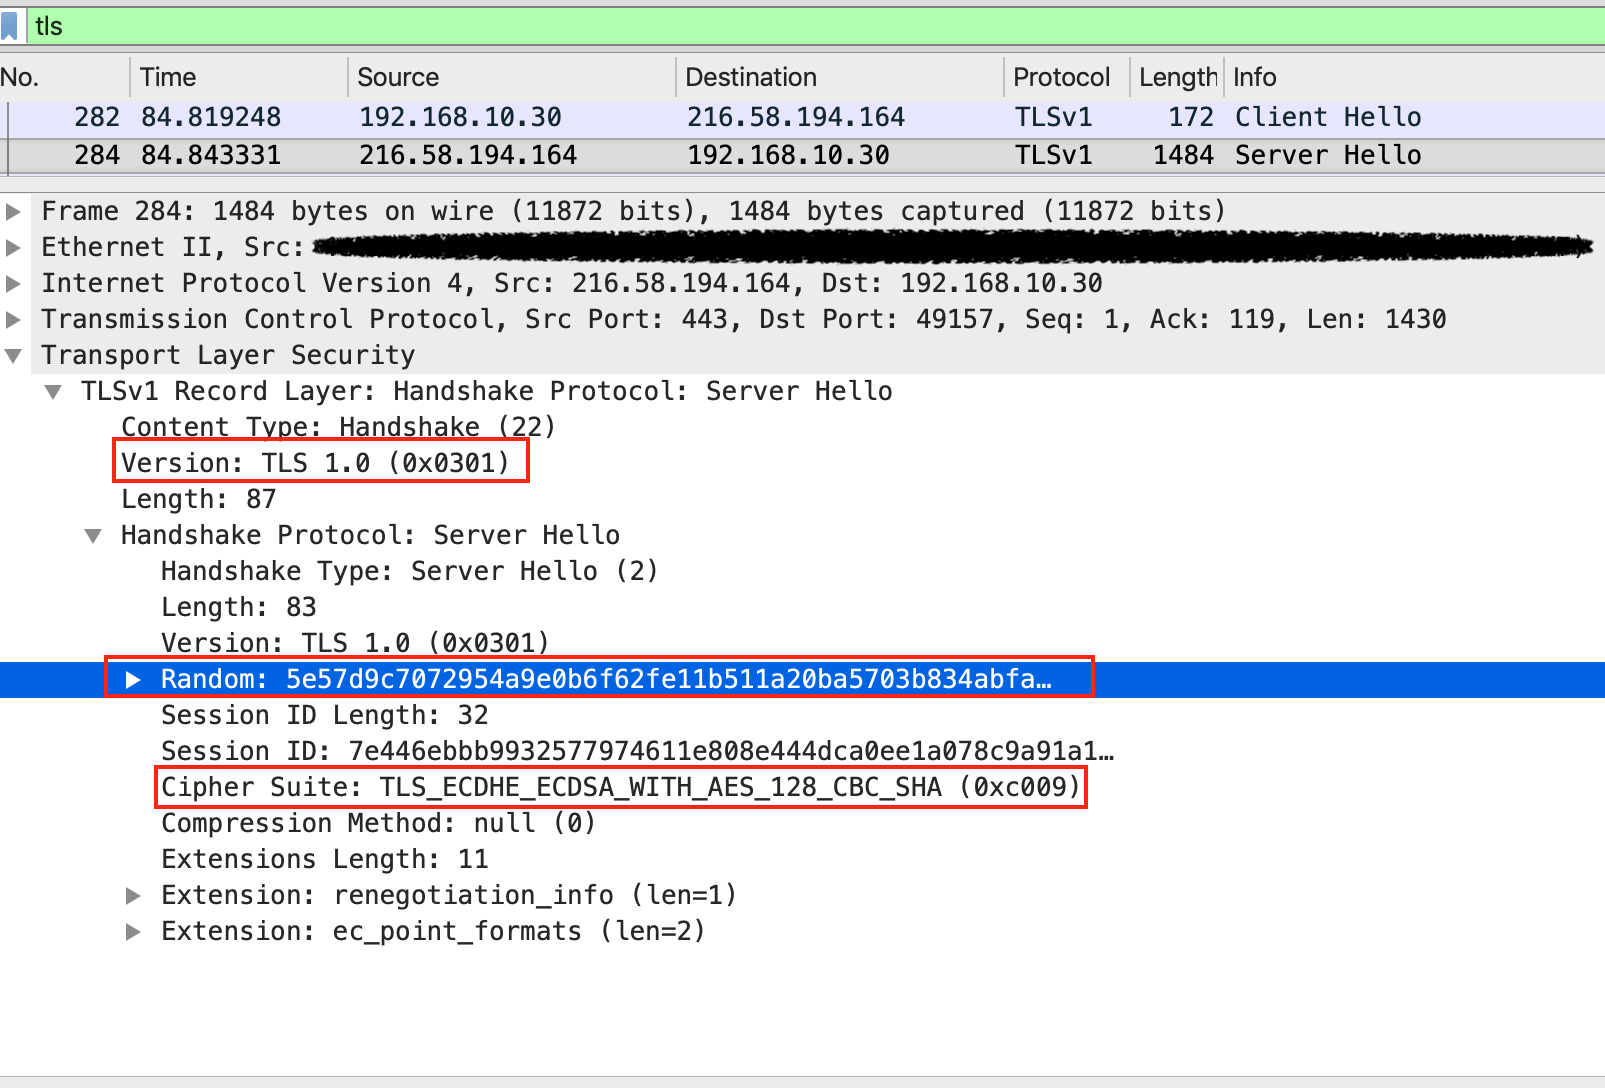 Image 6 is a screenshot of Wireshark. There are three red highlights showing, from top down, the version, the random tab, and the cipher suite. It is the initial SSL connection handshake. 